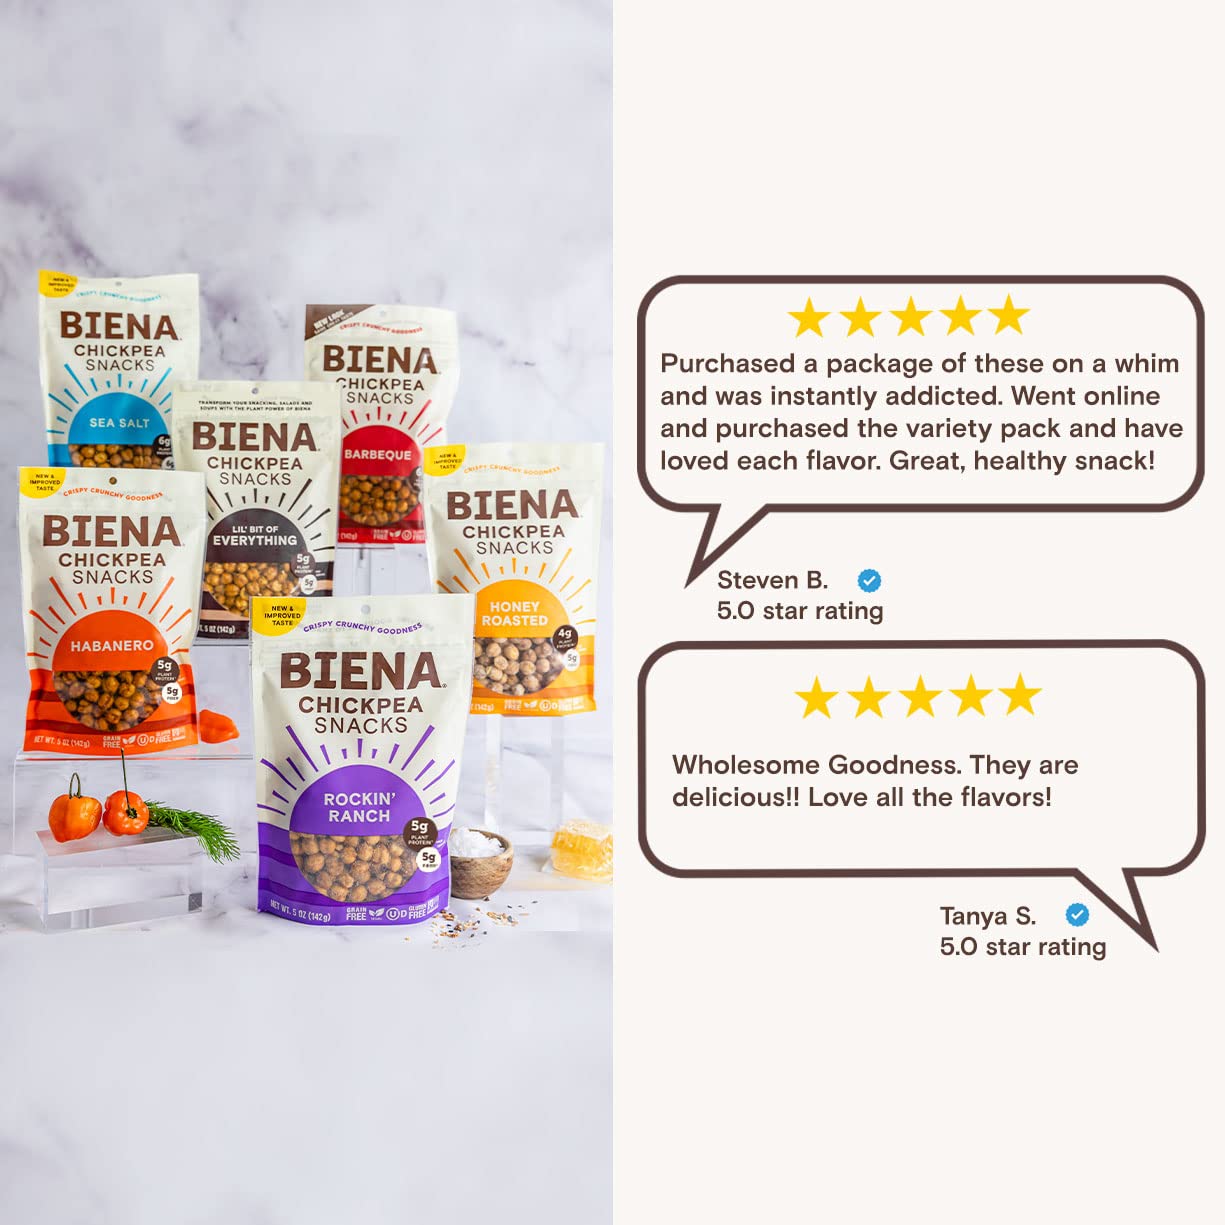 BIENA Roasted Chickpea Snacks – Variety Pack of 6, 5 Ounce Bags – Crispy Barbecue, Habanero, Honey Roasted, Sea Salt, Ranch & Everything Bagel Chickpeas –Delicious, Healthy Snacks for Adults and Kids